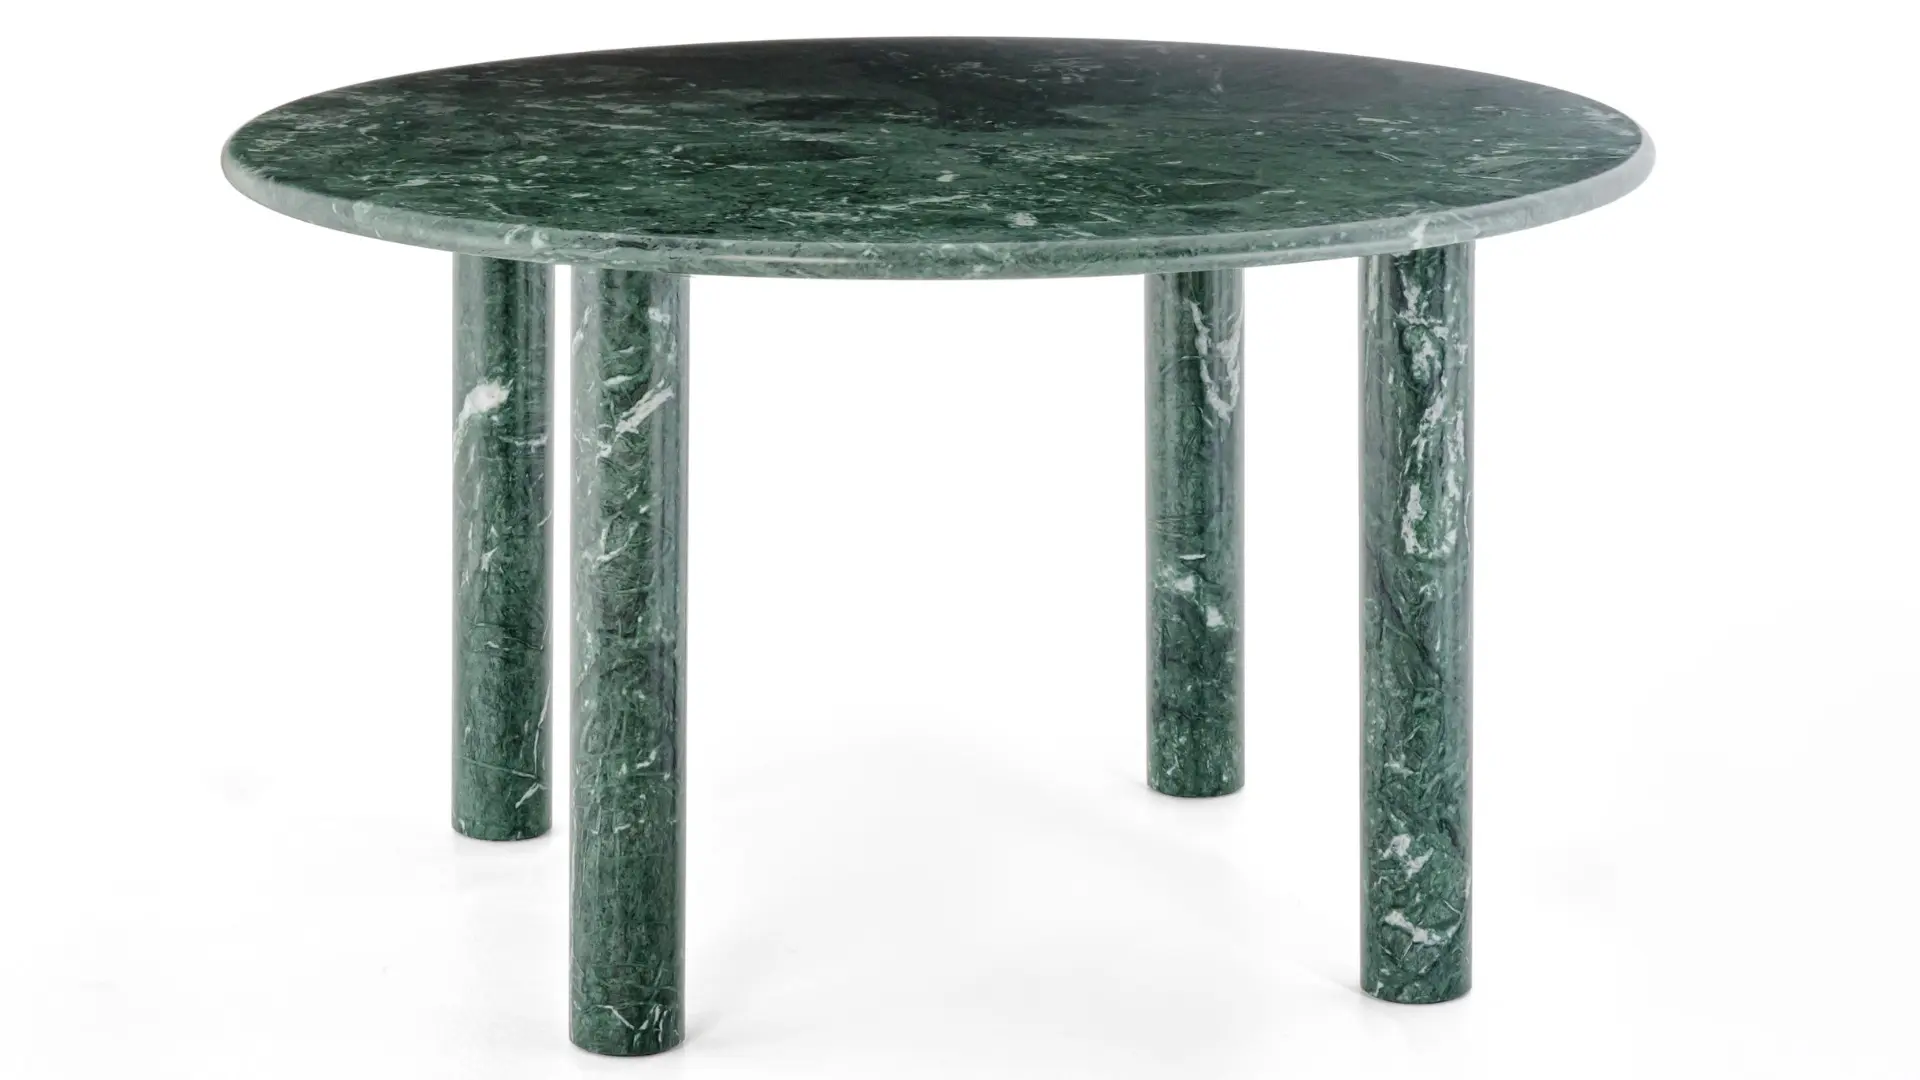 PAUL_DINING_TABLE_LIMITED_EDITION__3___.jpg